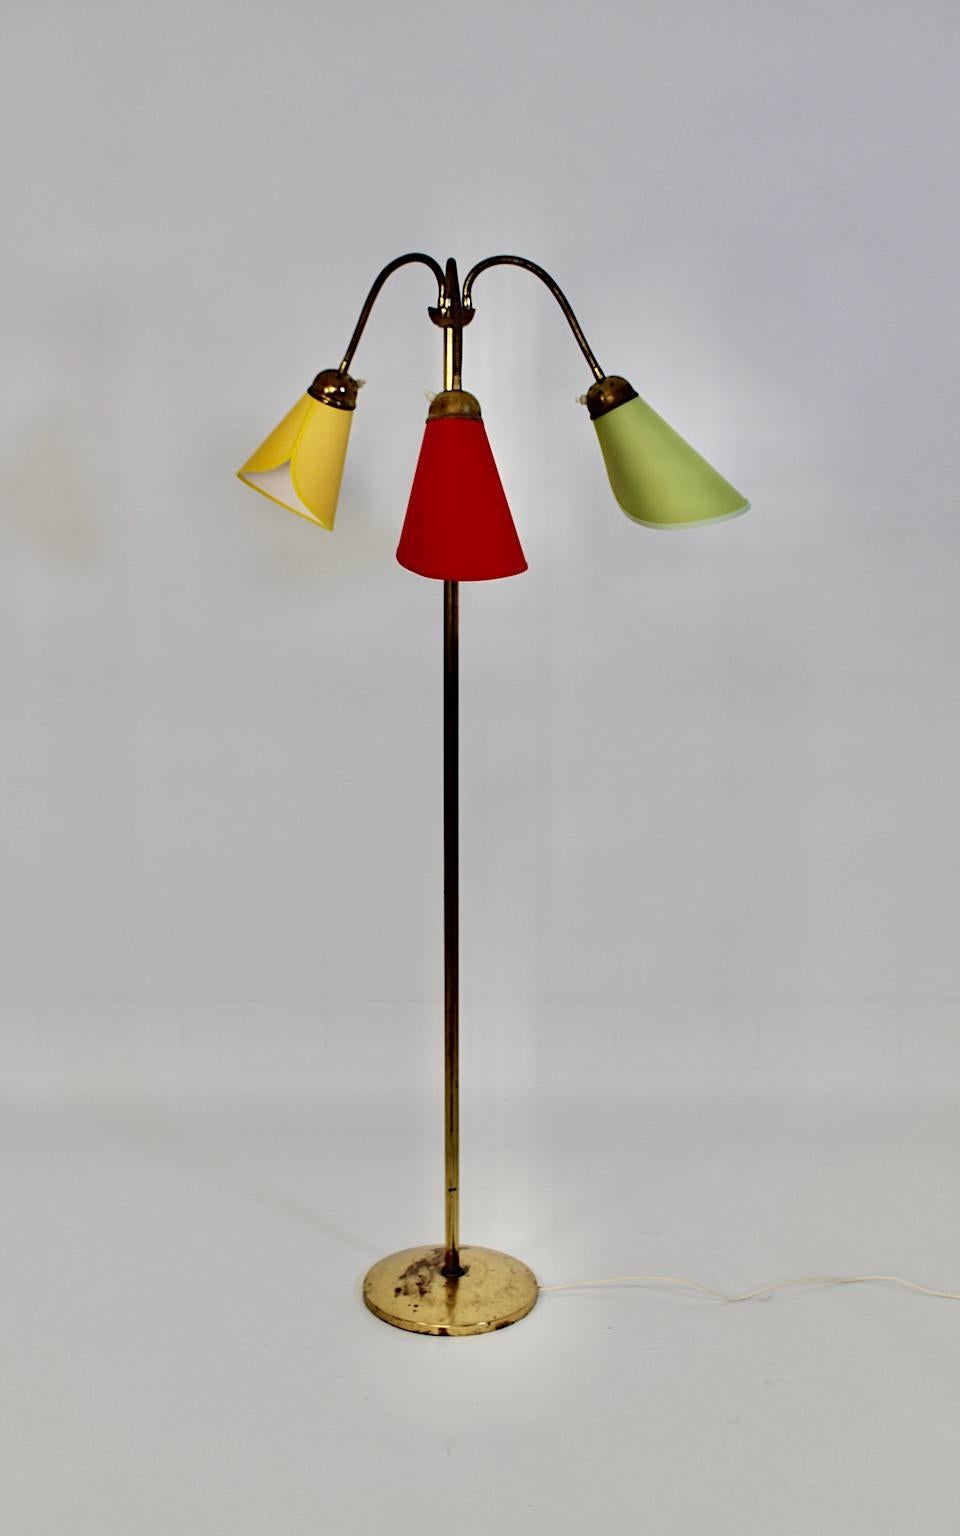 Mid Century Modern vintage brass floor lamp with colorful lamp shades 1950s Austria.
A stunning floor lamp from brass with three flexible arms topped with hand made lamp shades in cone shape with a circular base.
Each arm is separately to switch and